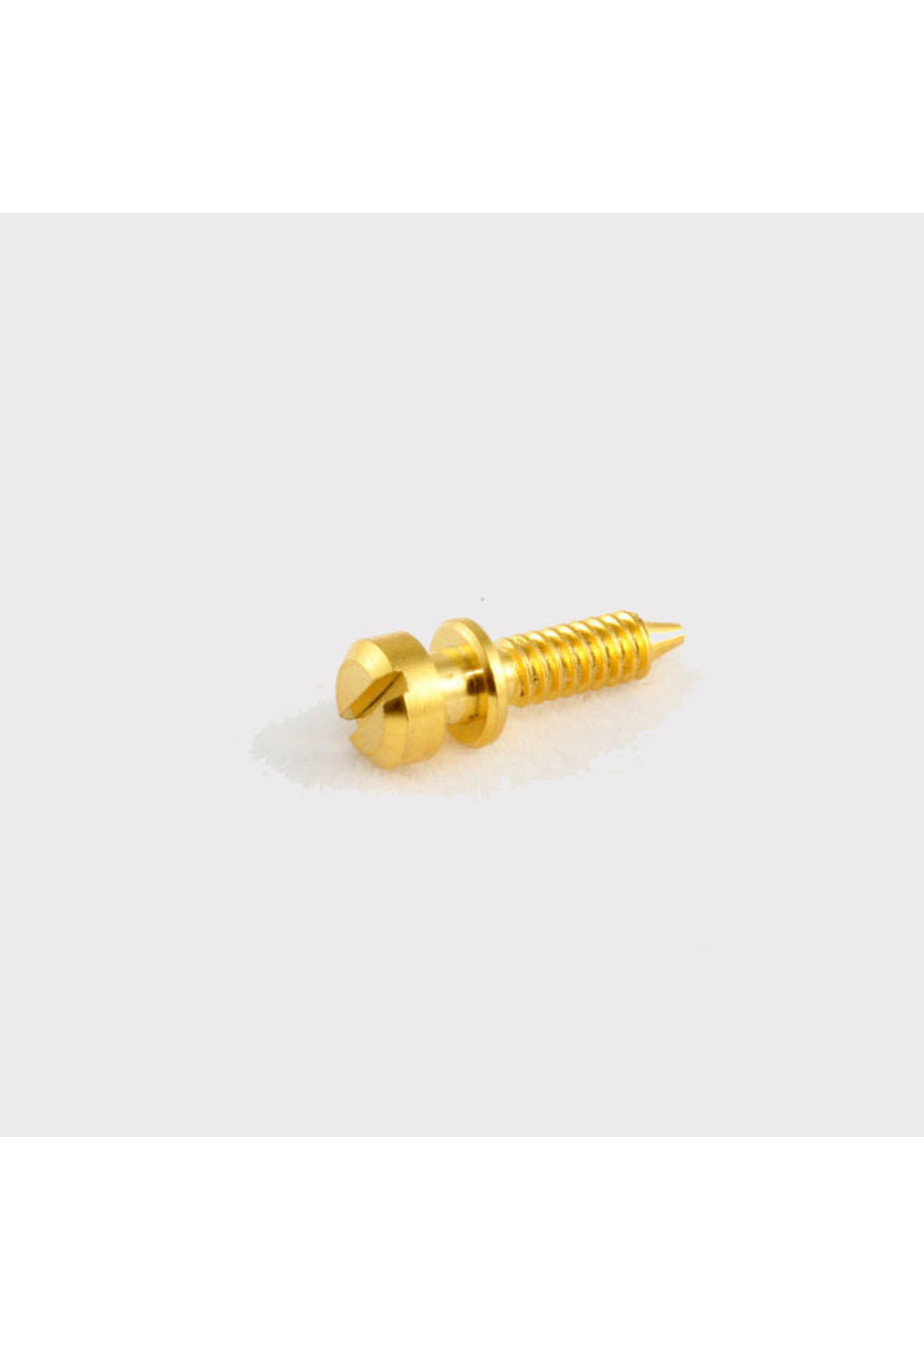 Allparts Allparts Intonation Screws for Old-Style Tunematic (Pack of 6), Gold